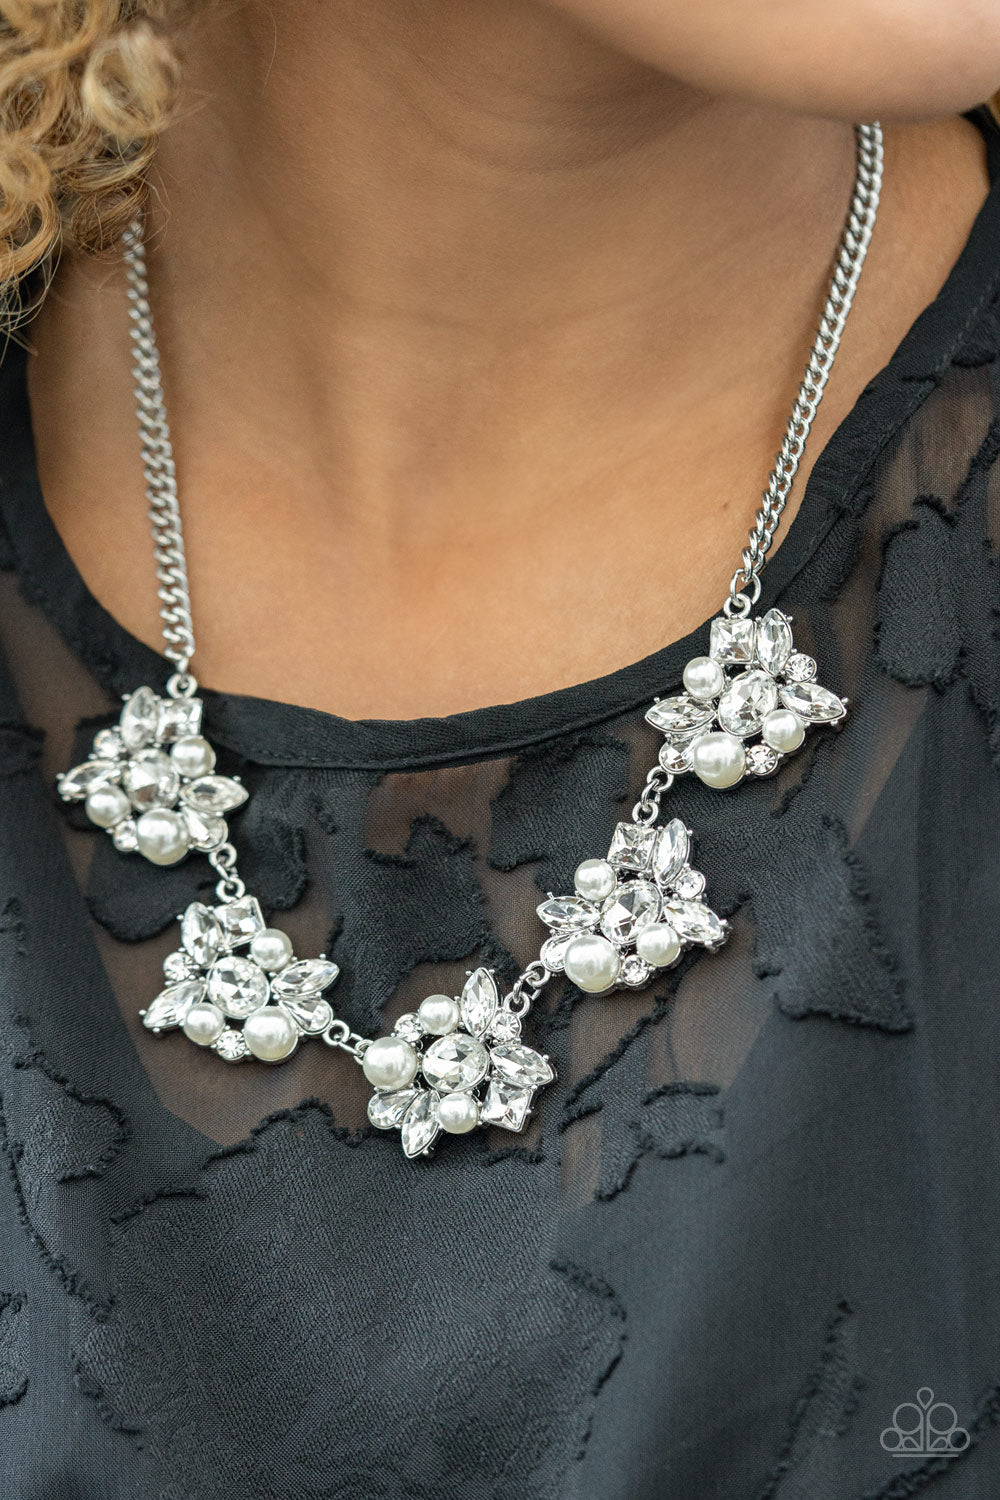 HEIRESS of Them All Necklace - White Bling